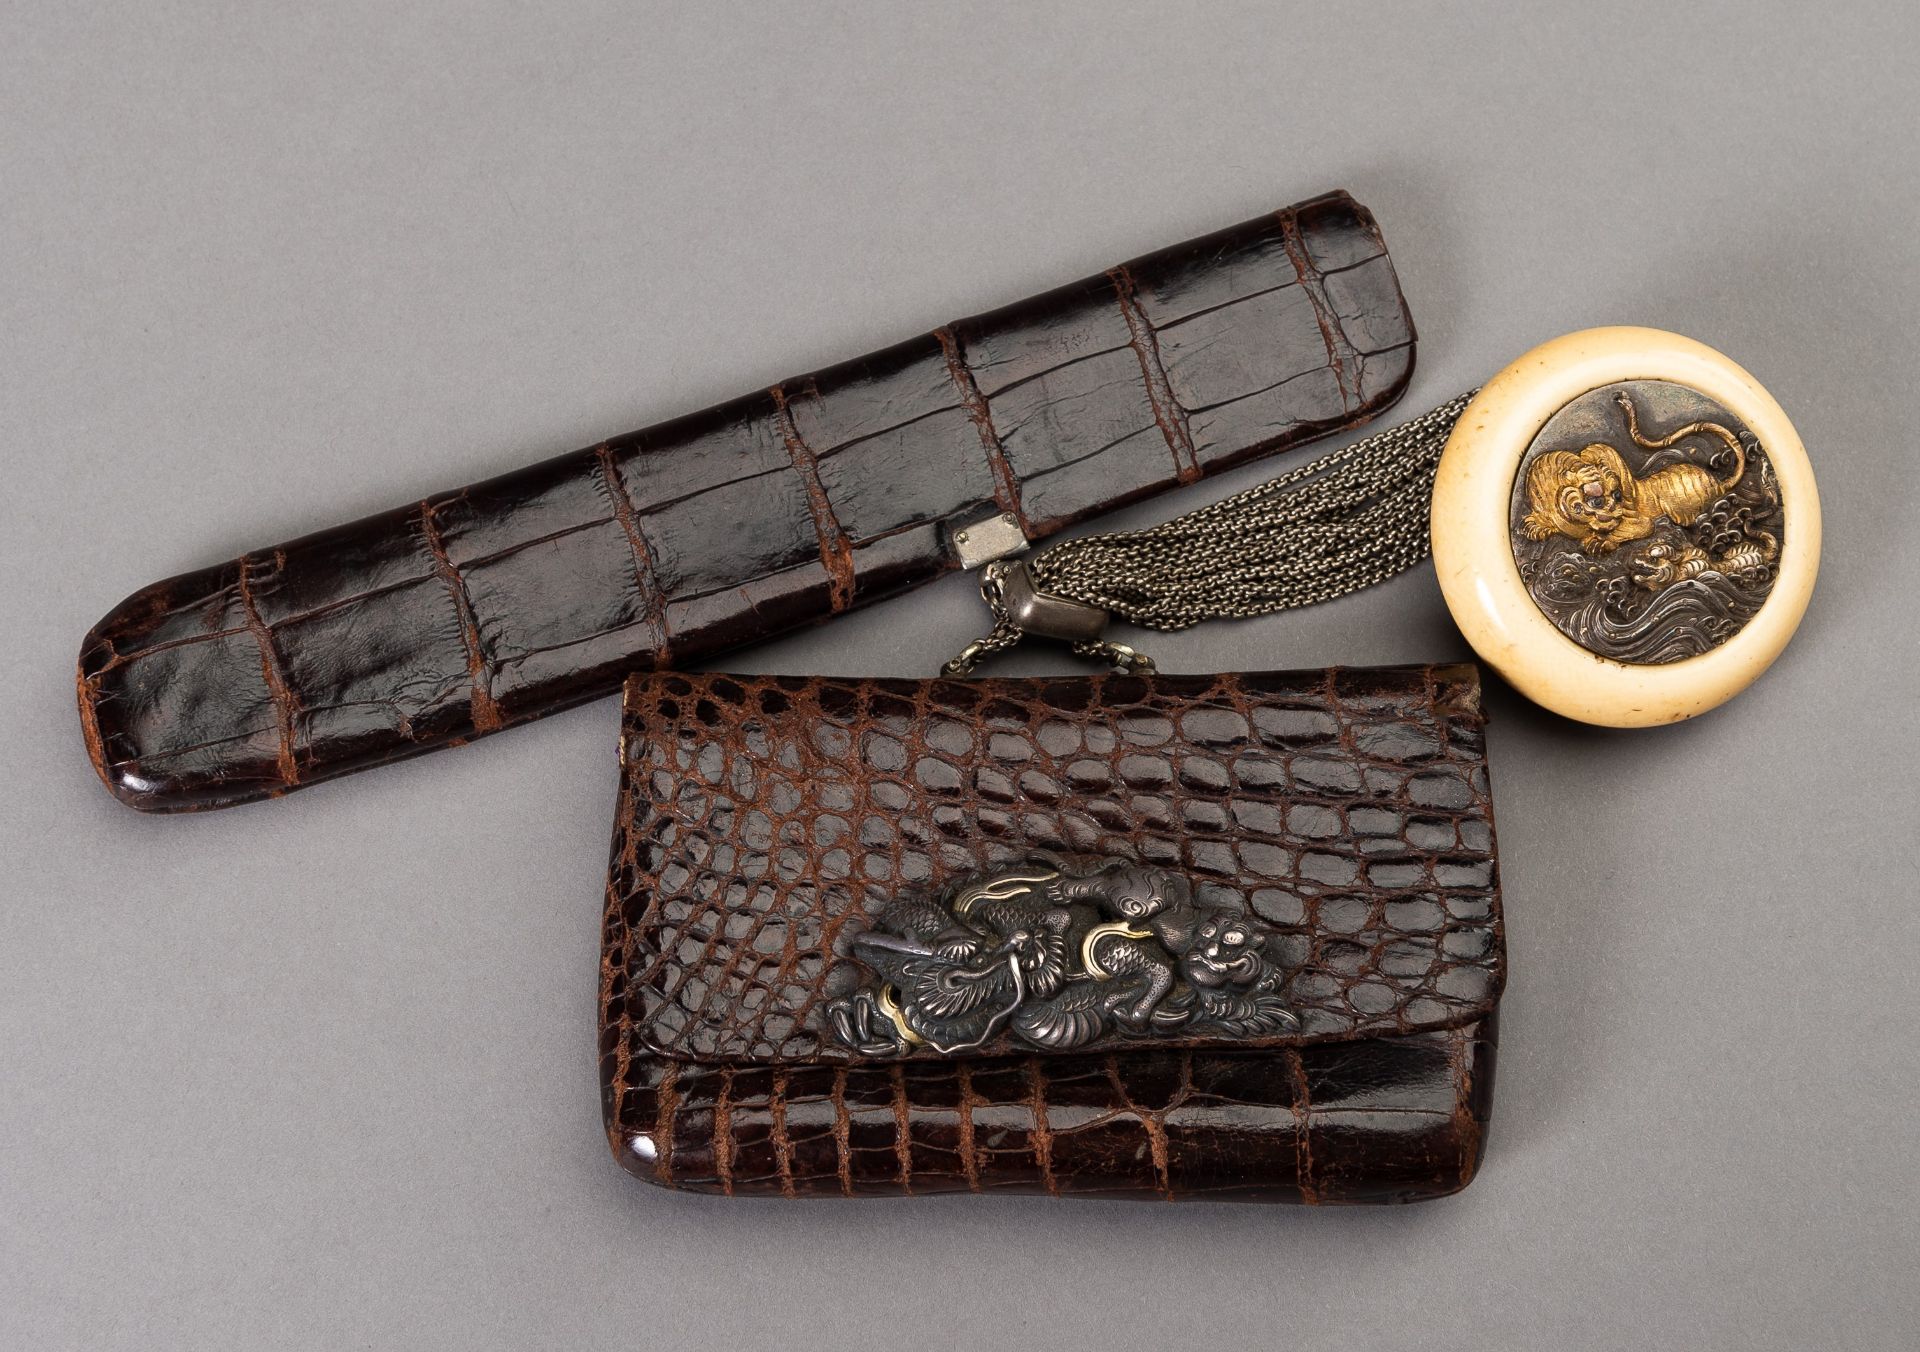 A LEATHER TABAKO-IRE AND ENSEMBLE WITH SILVER-FITTED KAGAMIBUTA NETSUKE DEPICTING A TIGER AND YOUNG